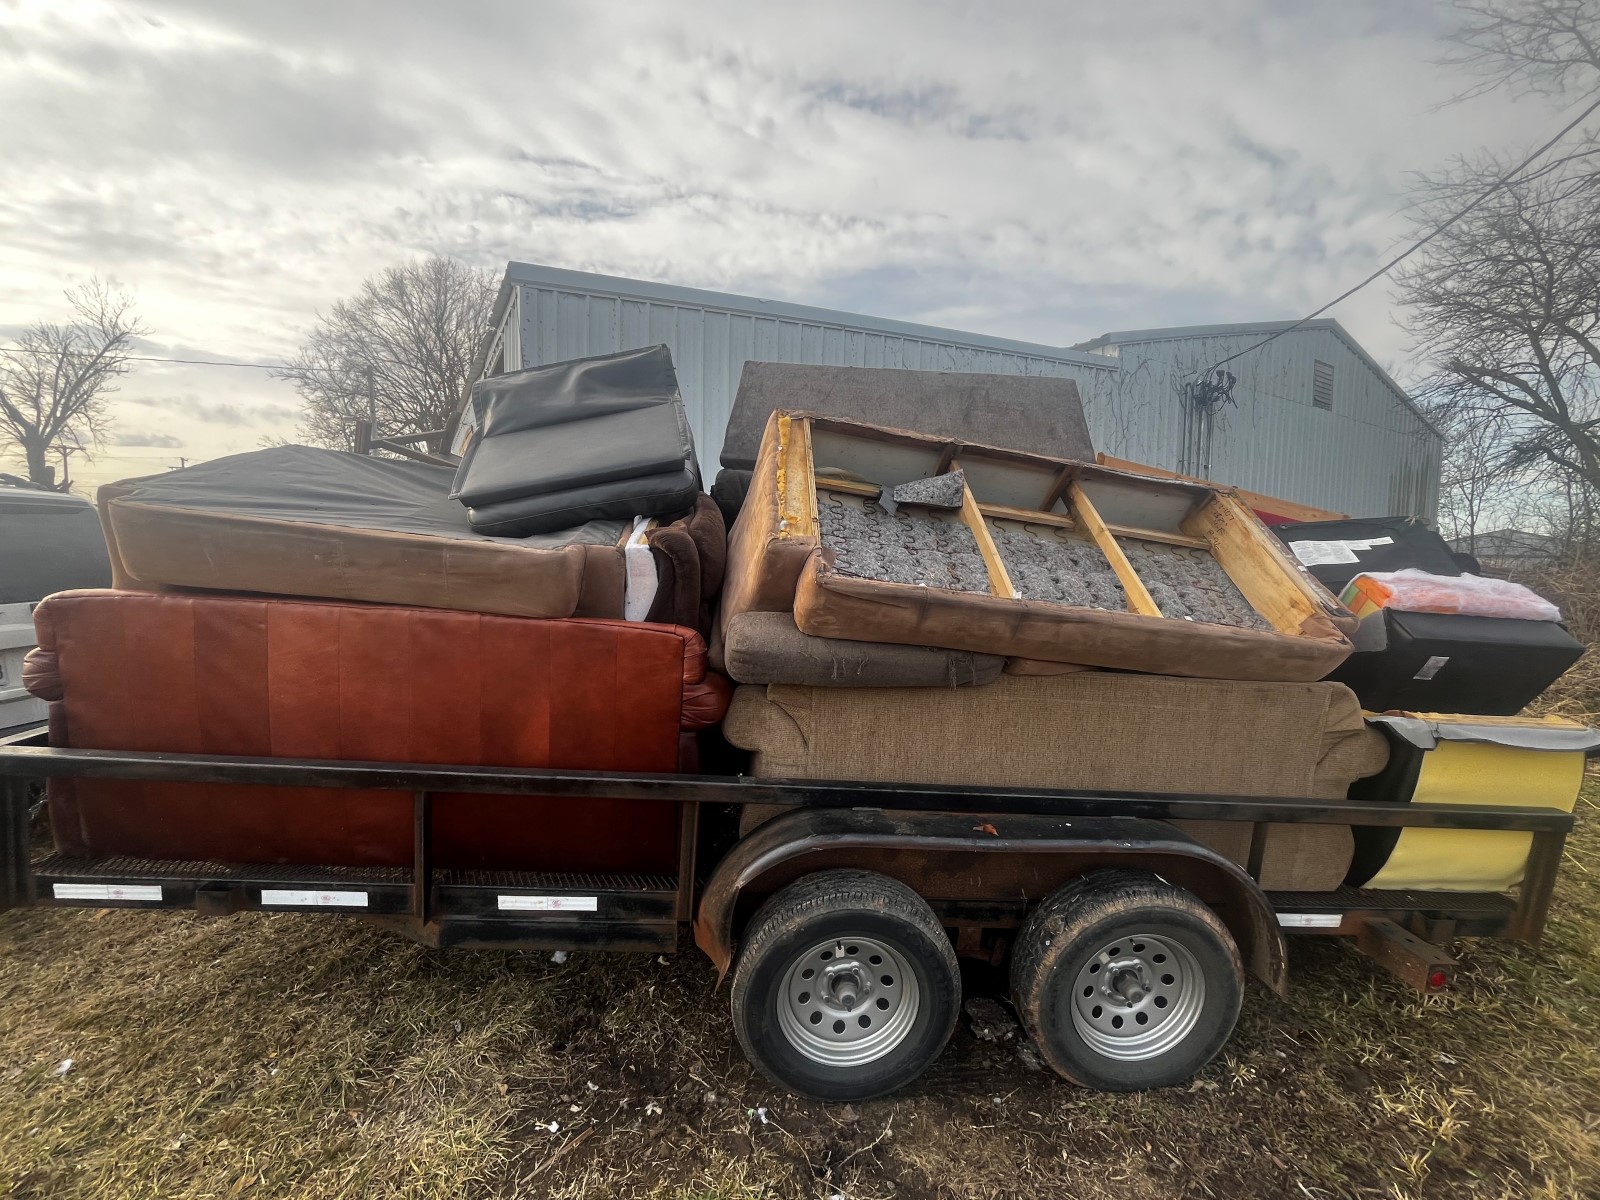 A flatbed trailer loaded up with old furniture.